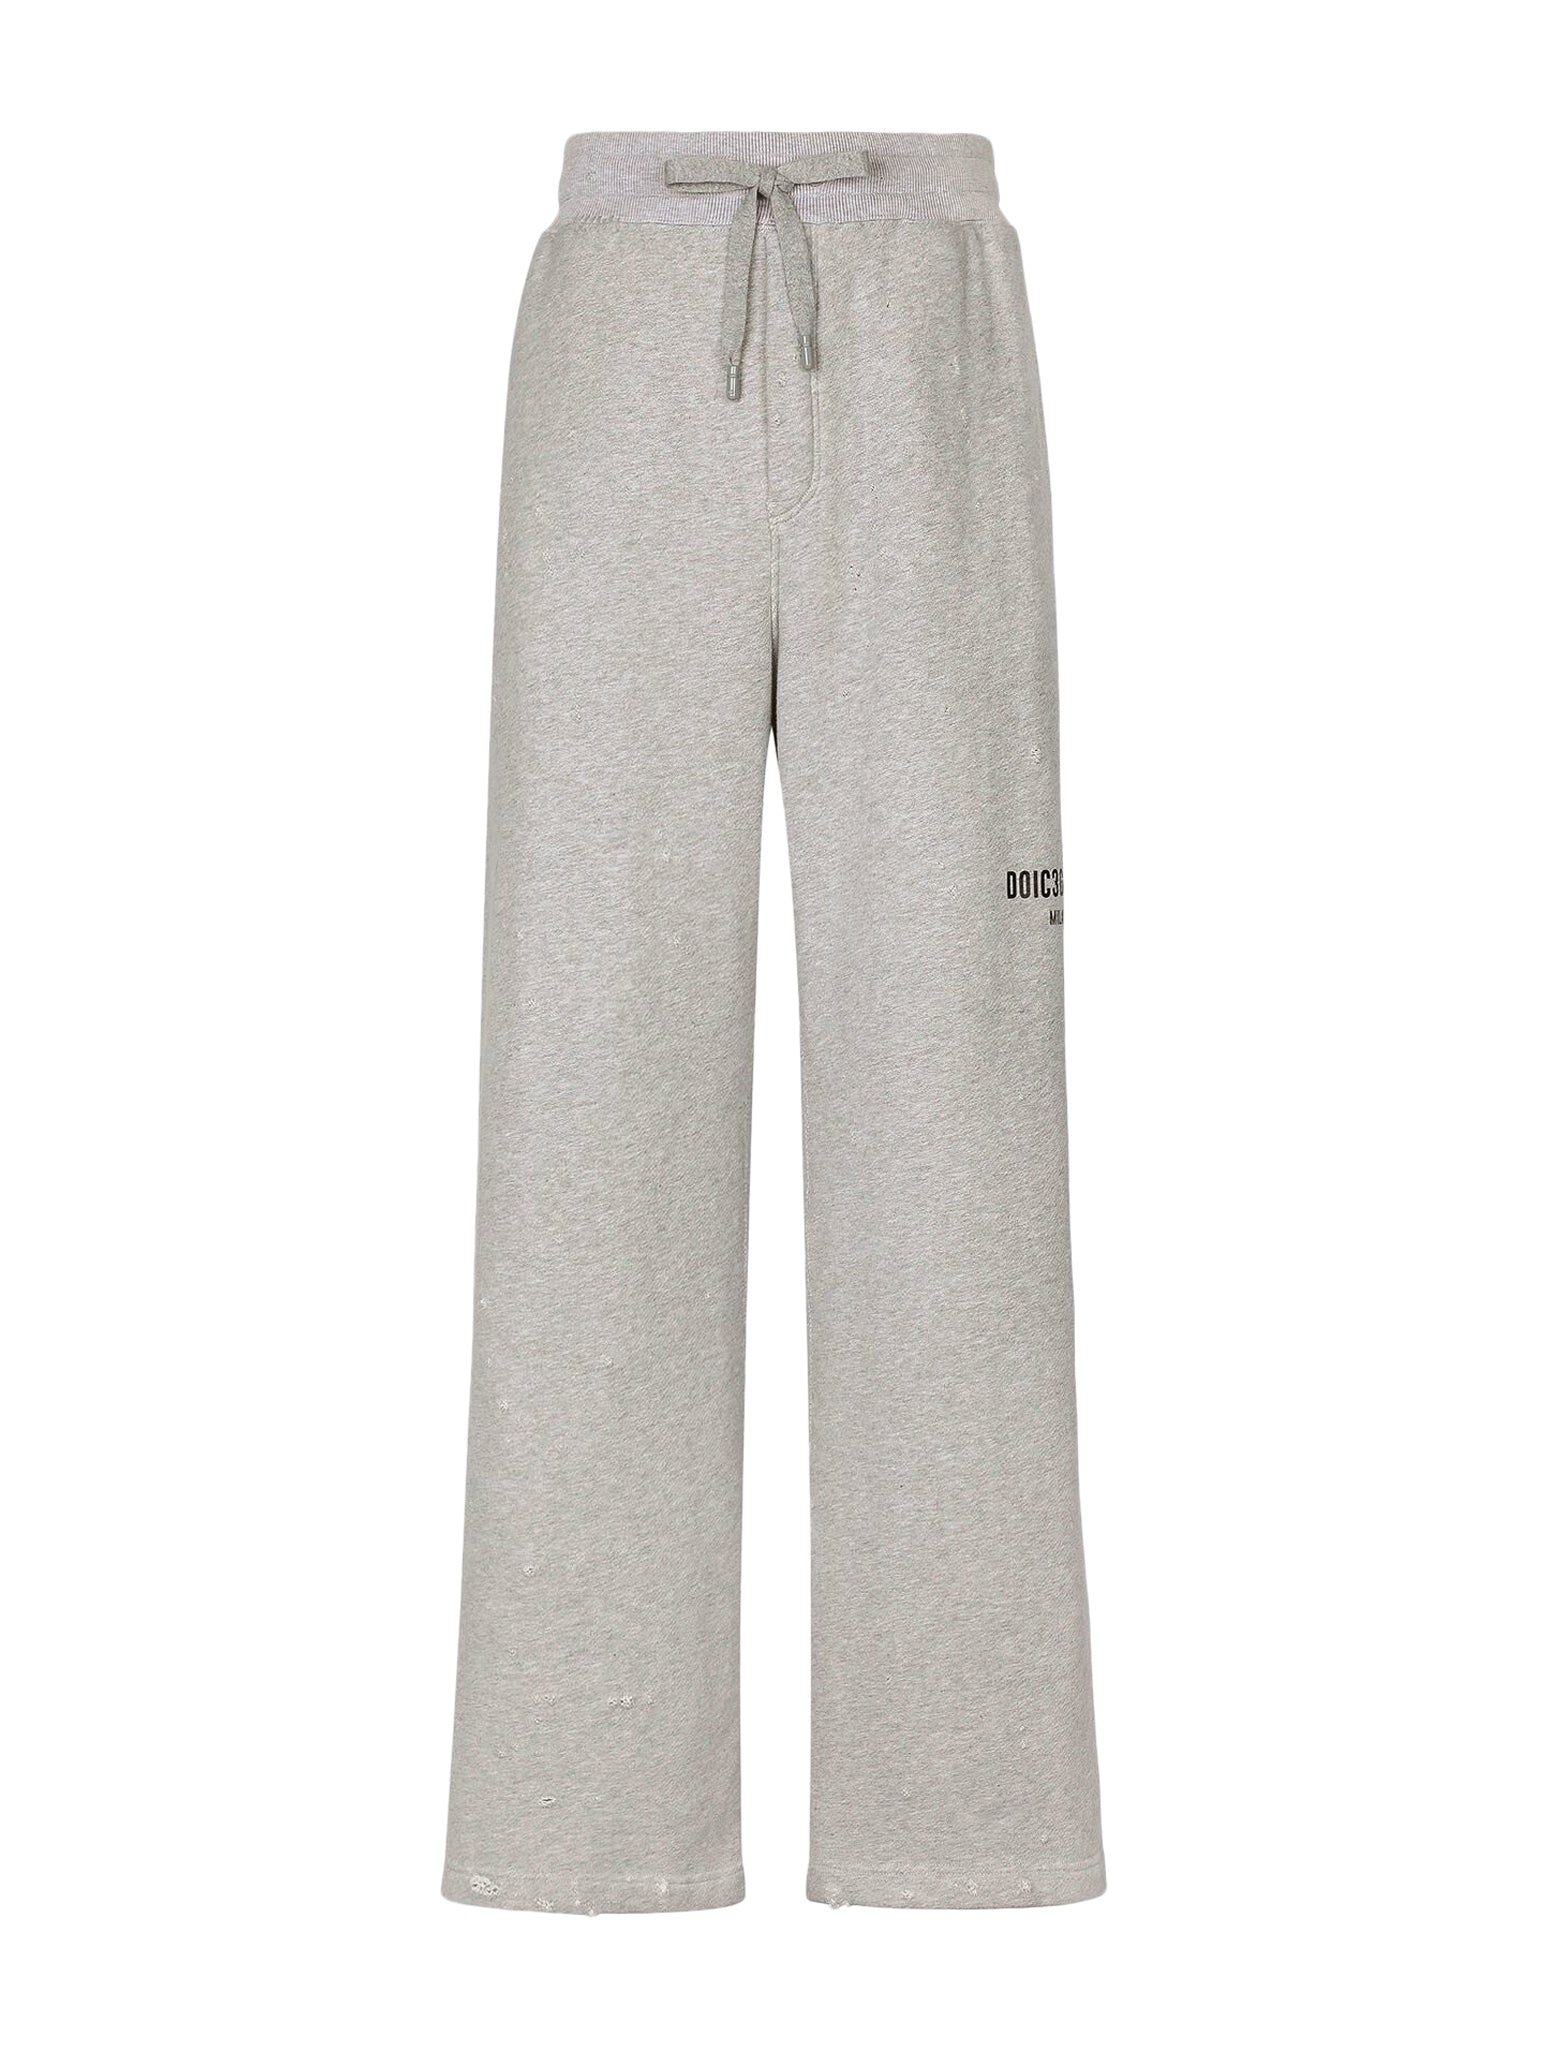 Jogging trousers with print and small abrasions